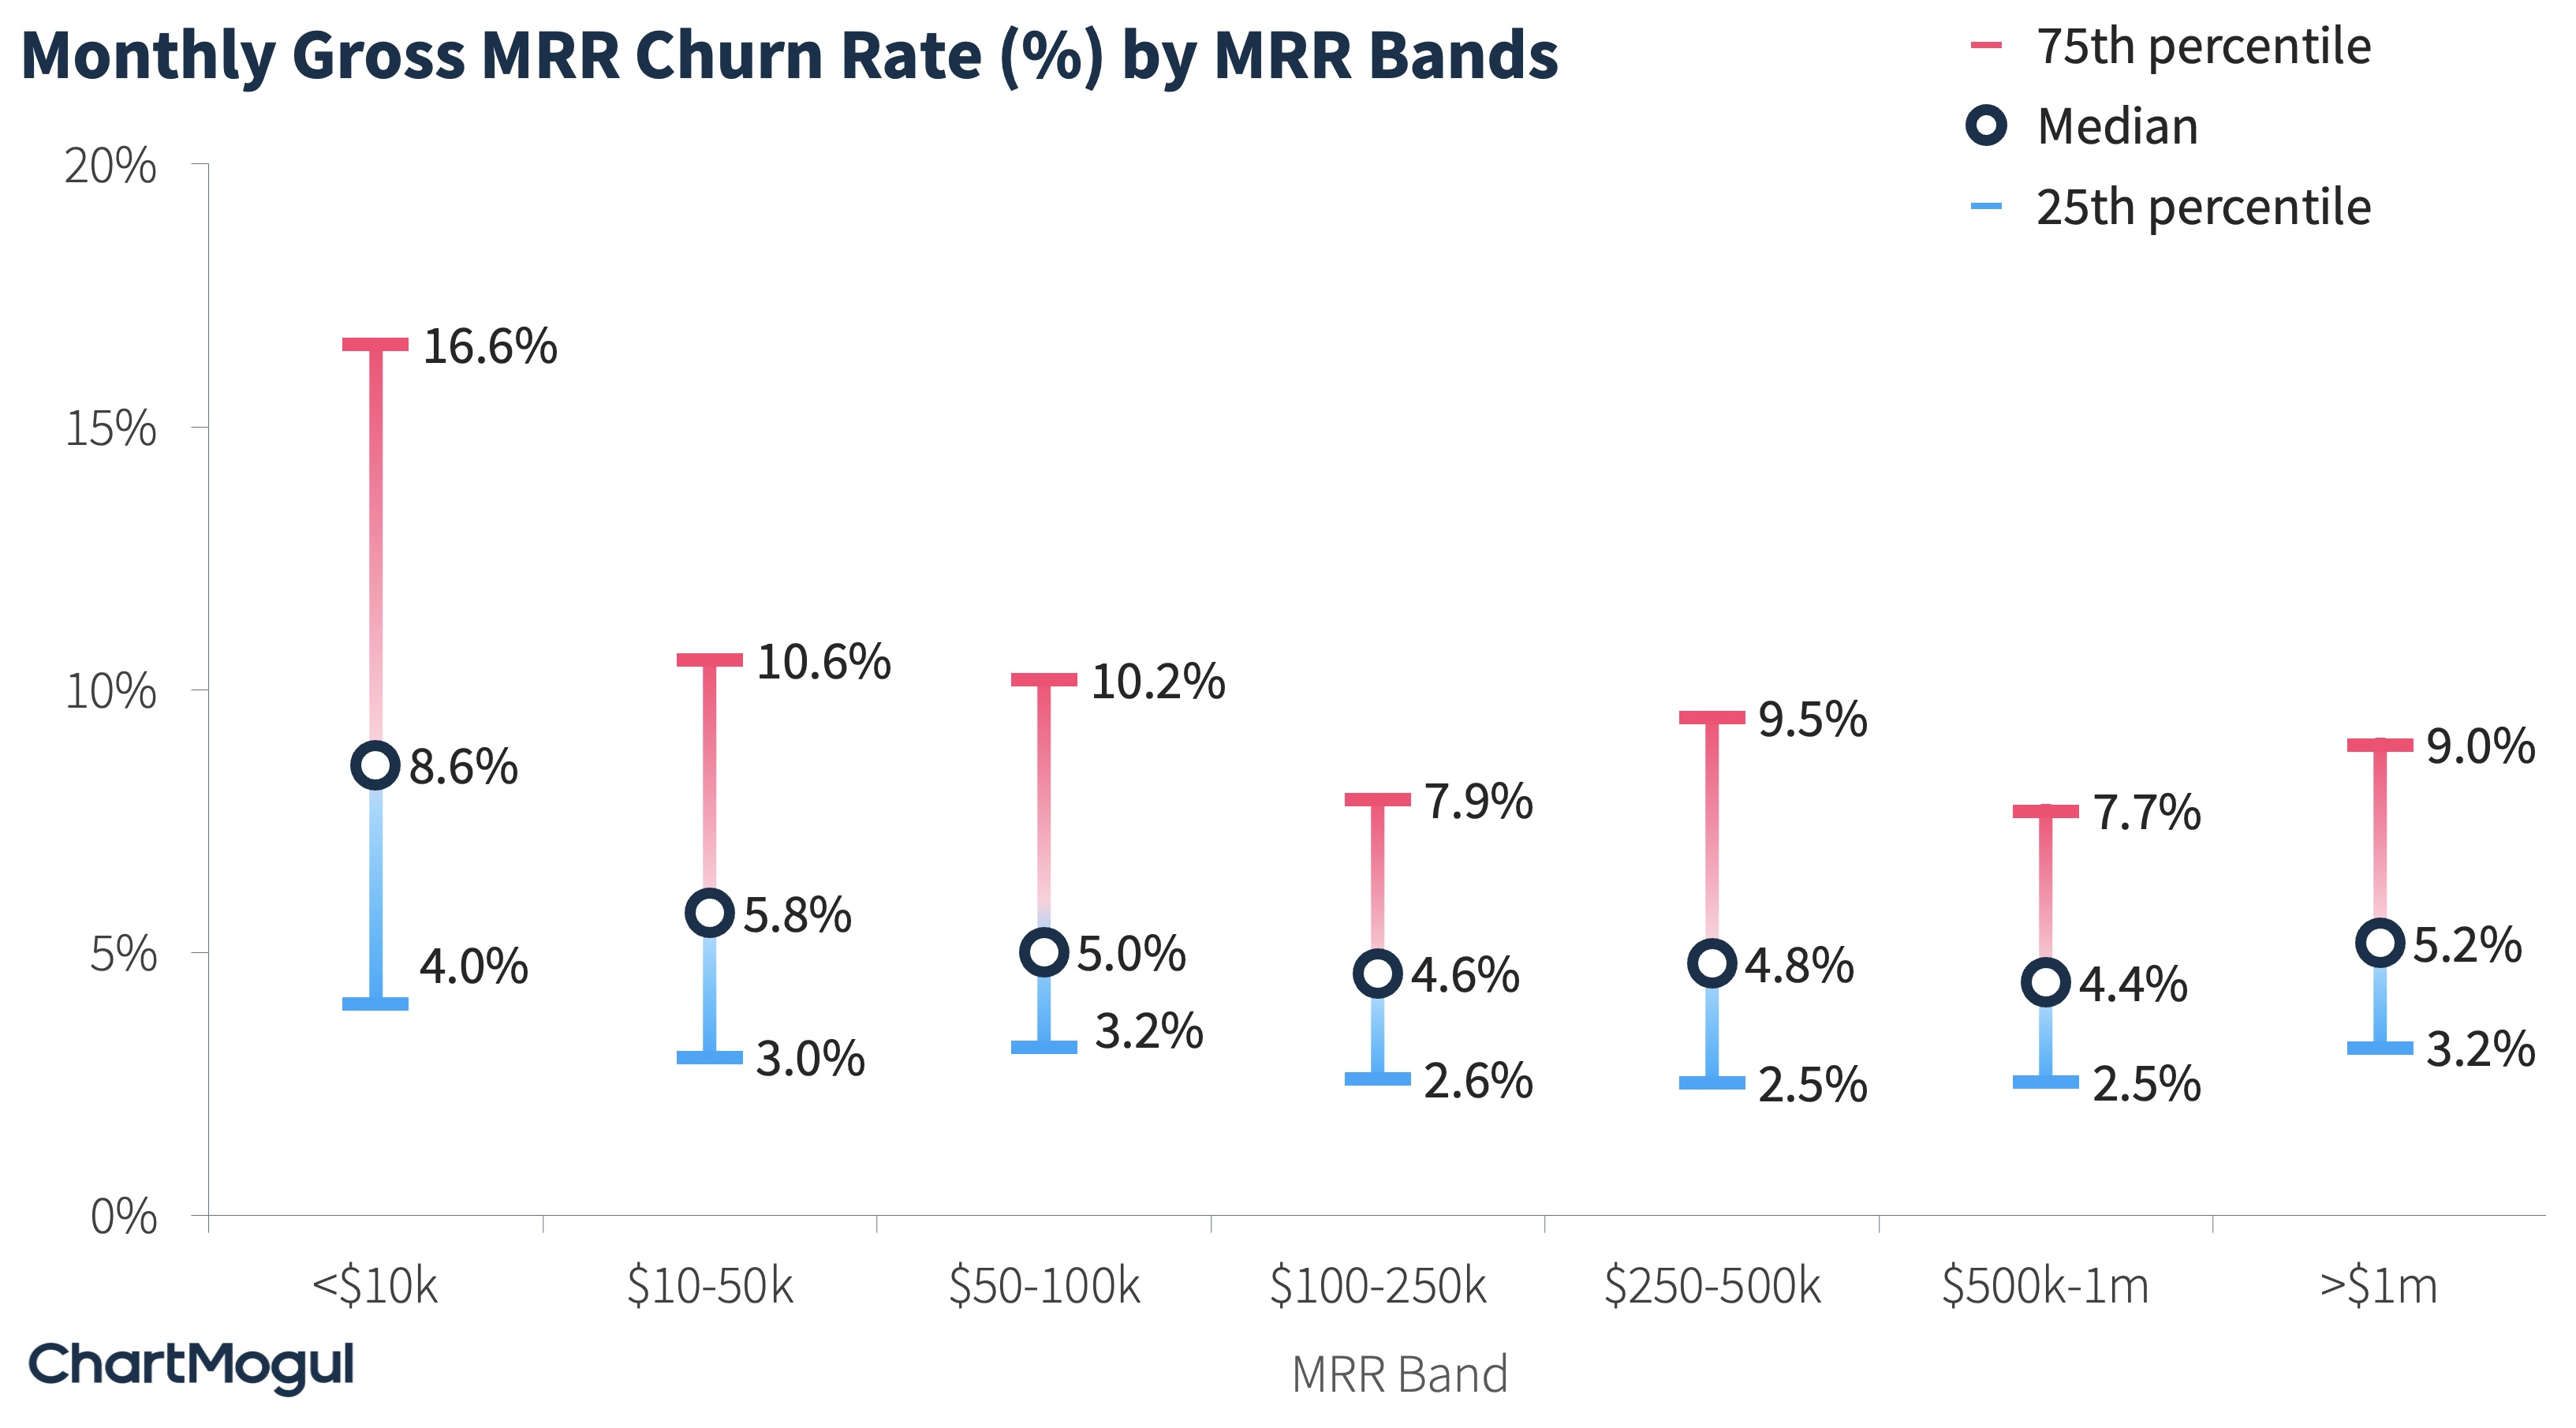 Monthly gross MRR churn rate by MRR bands